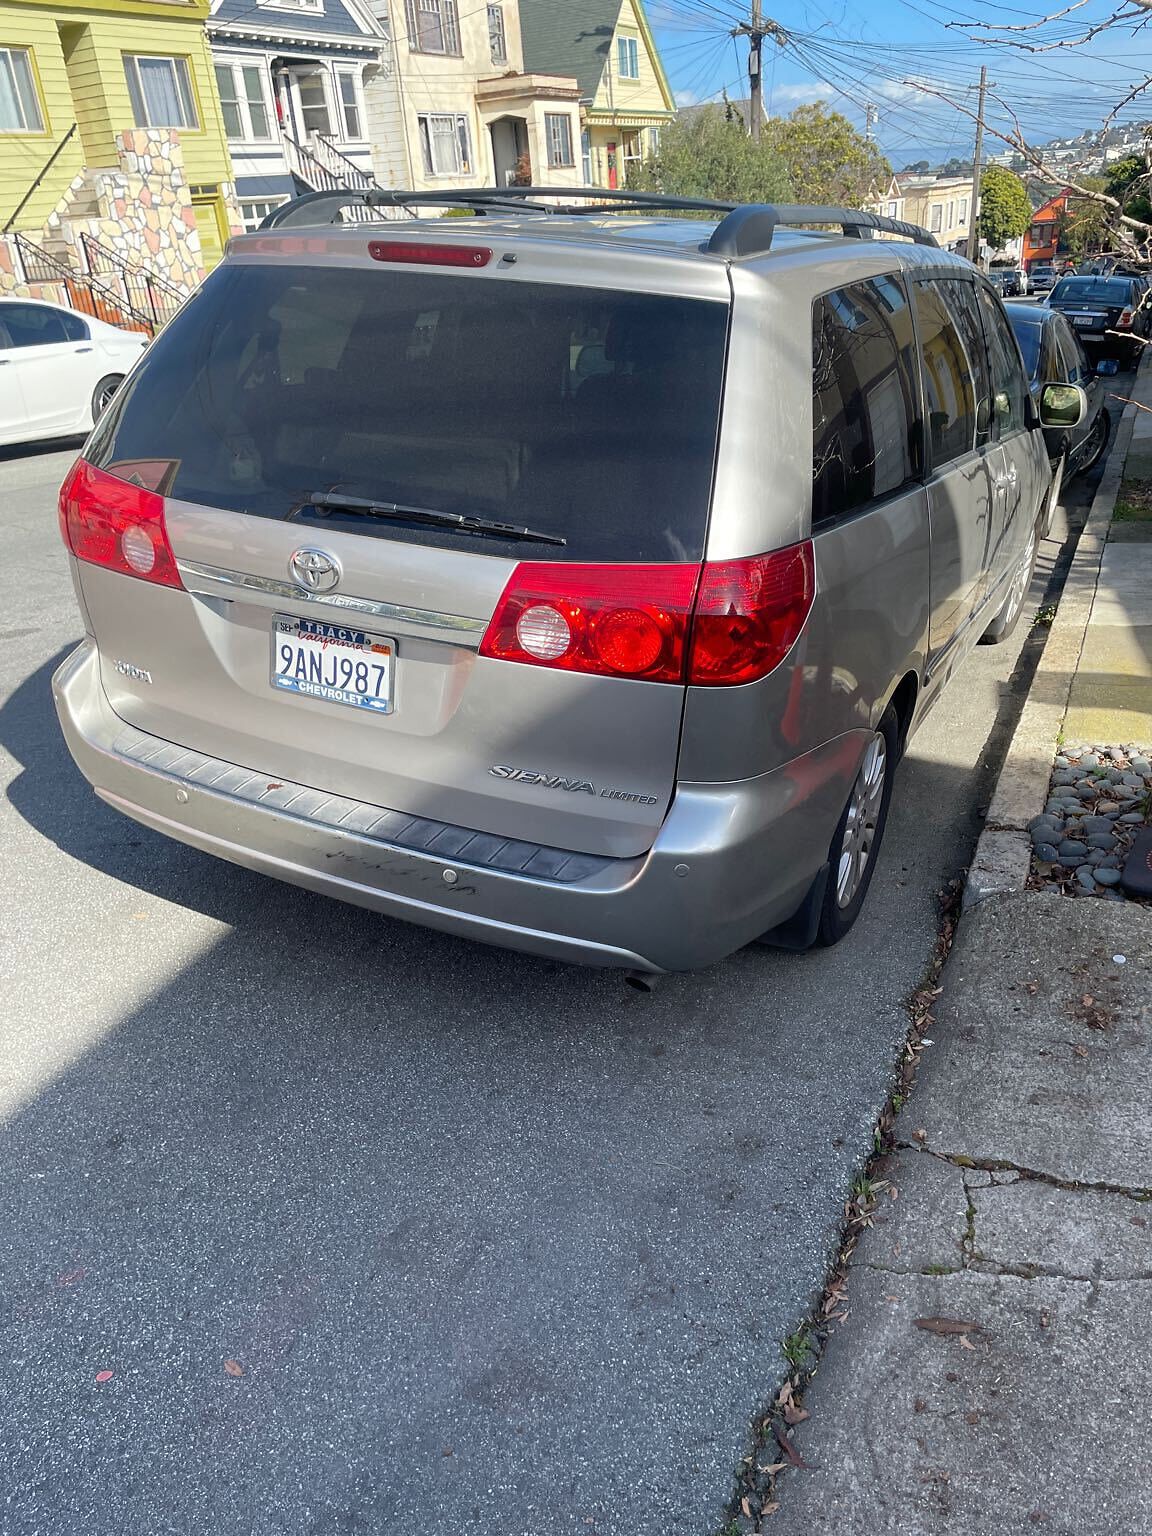 Photo of car in the street with license plate 9ANJ987 in California